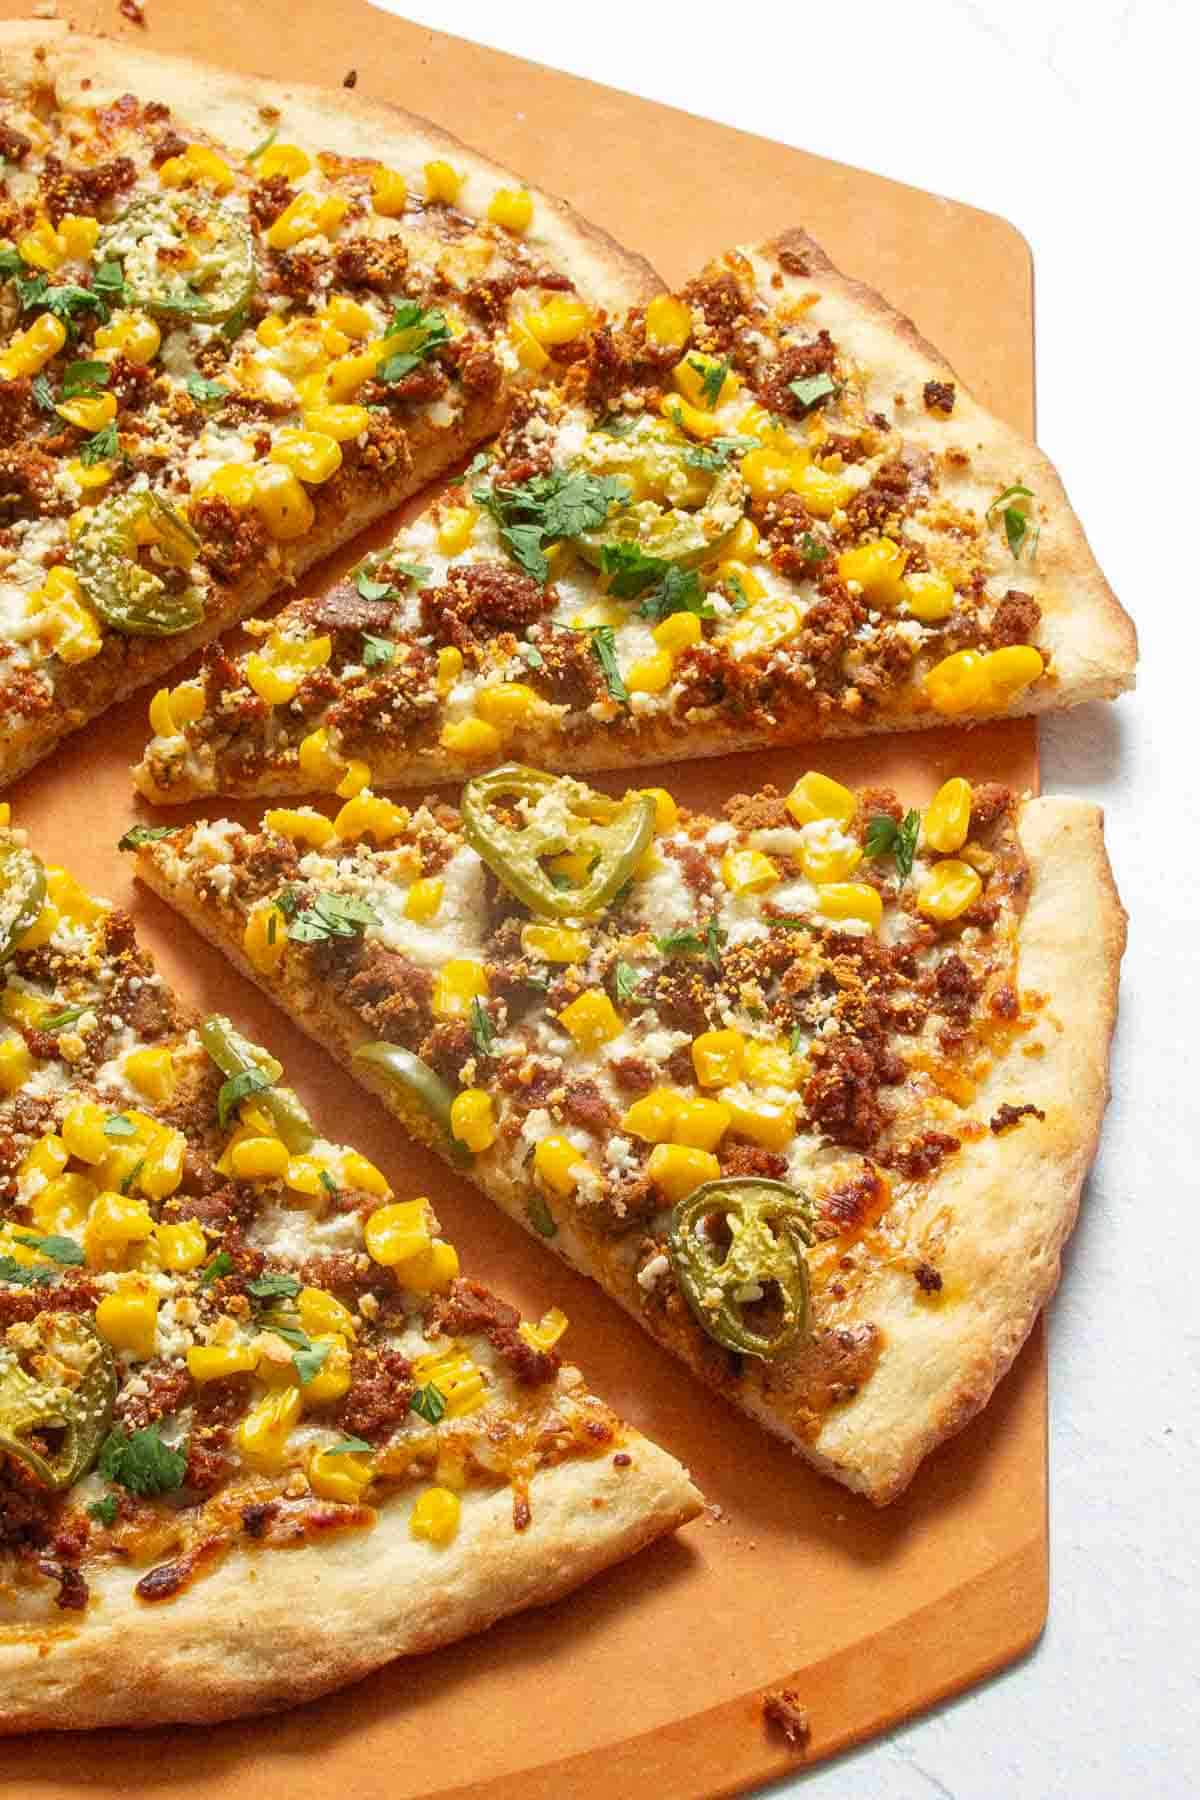 A pizza topped with corn kernels, sliced jalapenos, crumbled meat, cilantro, and cheese, sliced into triangles on a wooden board.